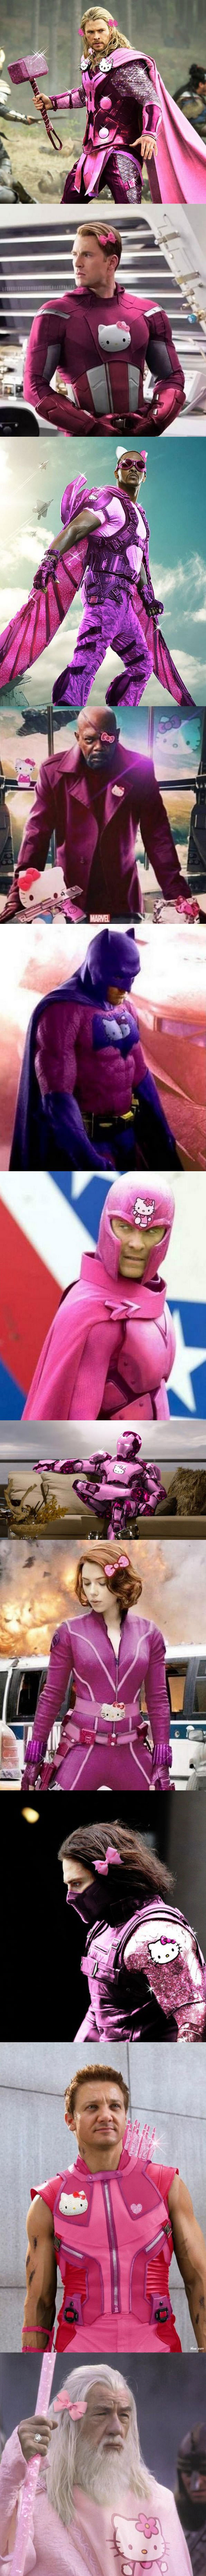 super kitty héros, marvel and dc superheros in hello kitty style suits, pink